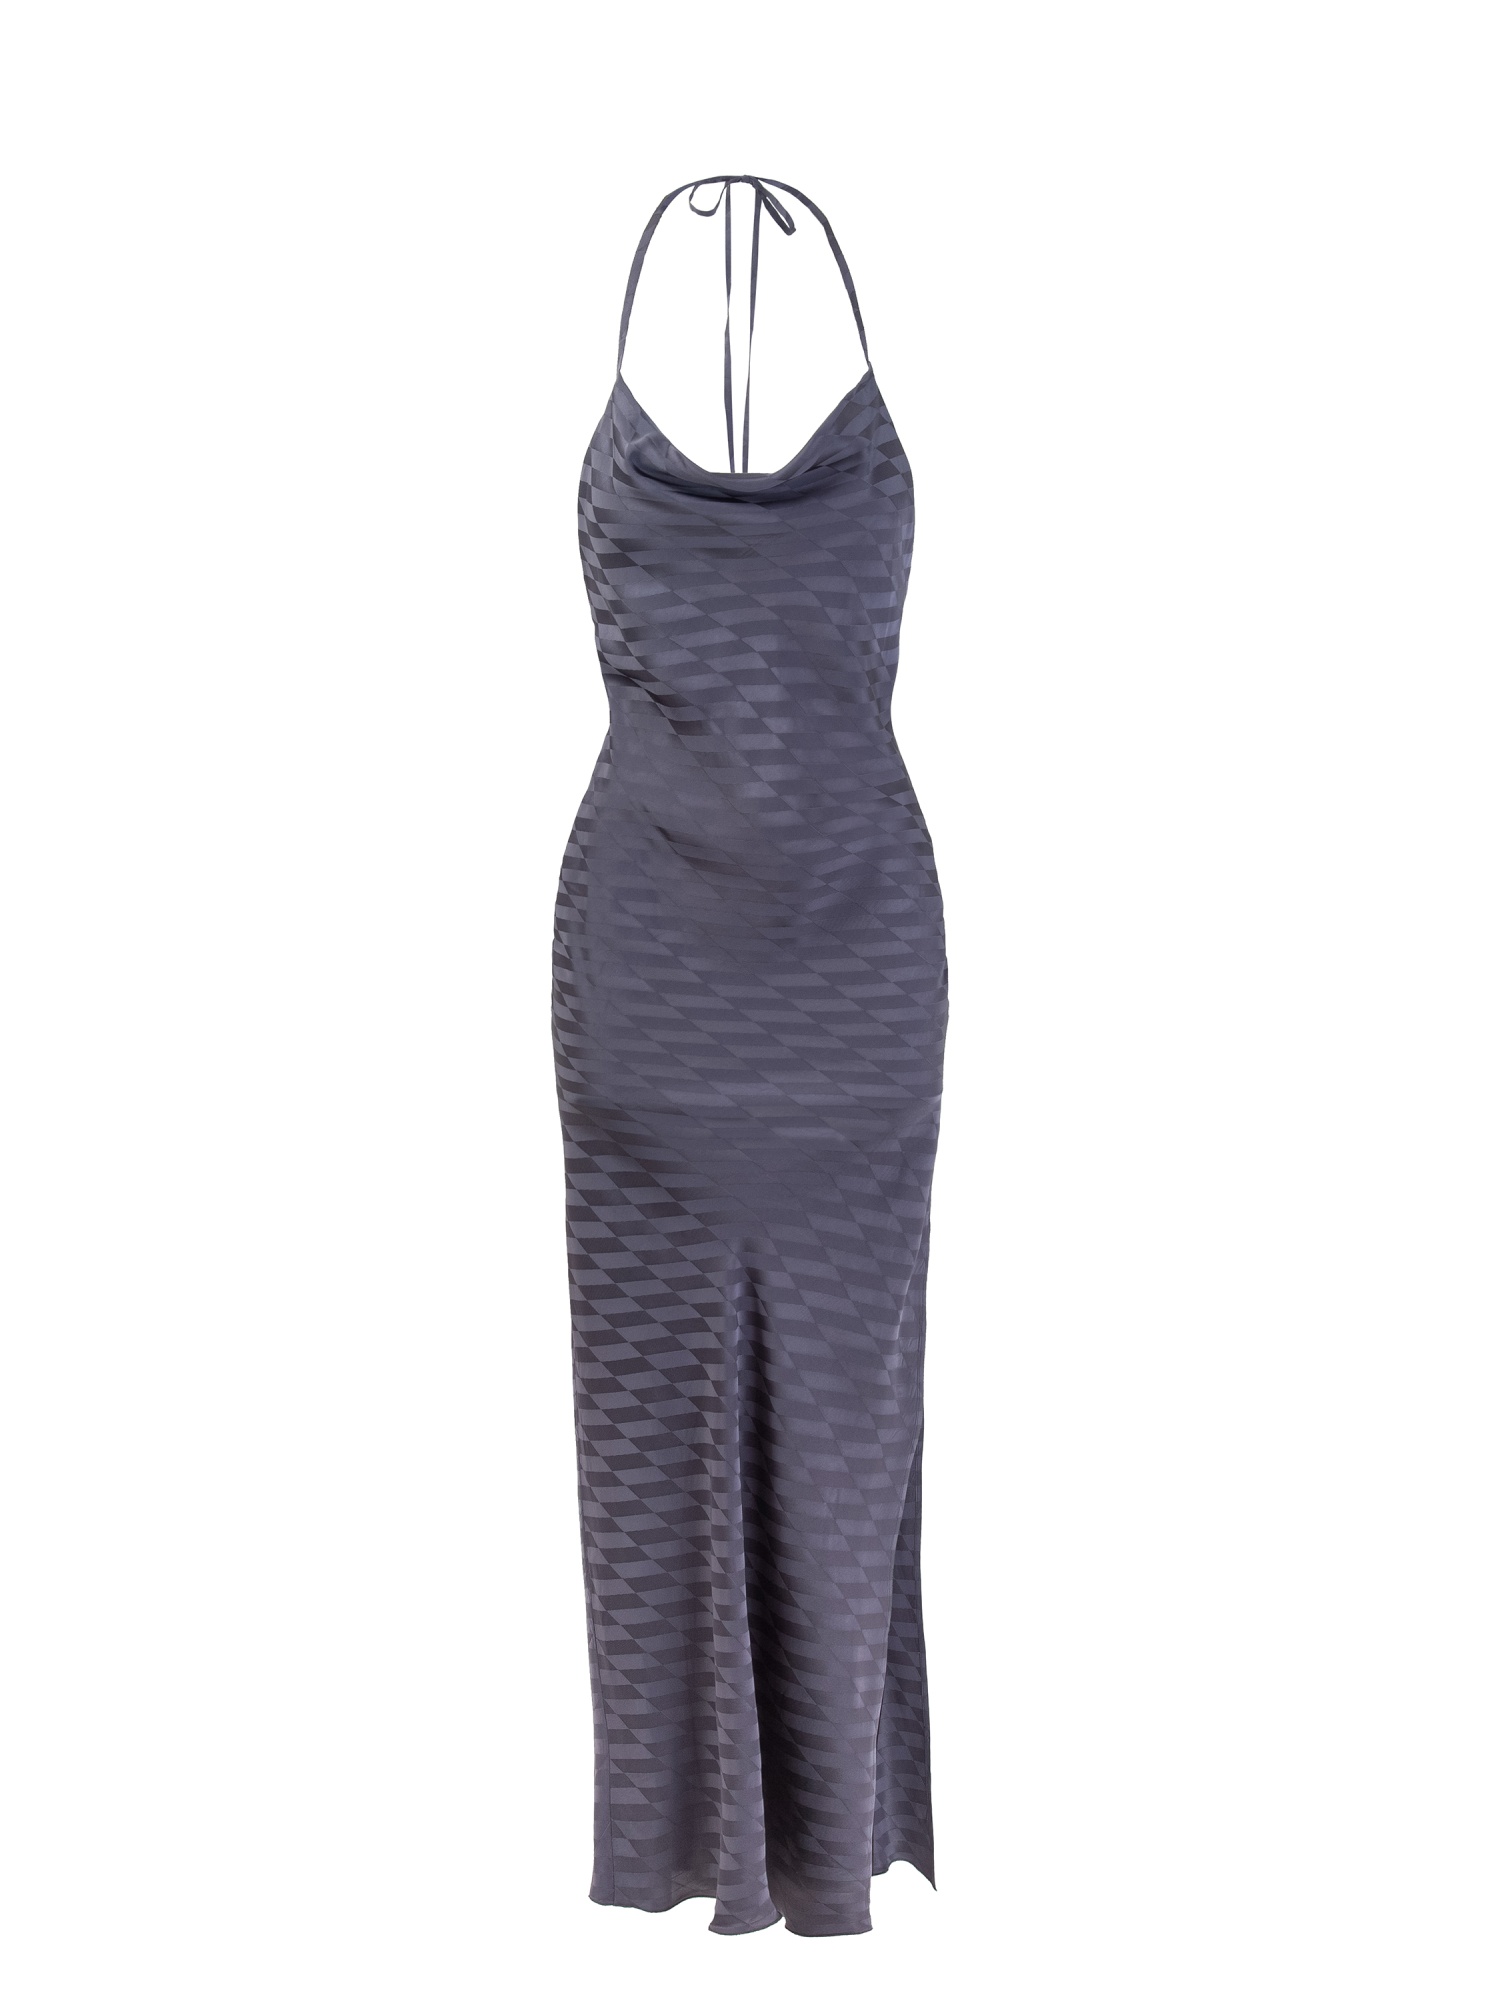 Women's shiny satin dress, long elegant gray dress, sleeveless, with laces, back out and slit. Gray colour. 100% viscose, jacquard design. made in Italy. Buy online!